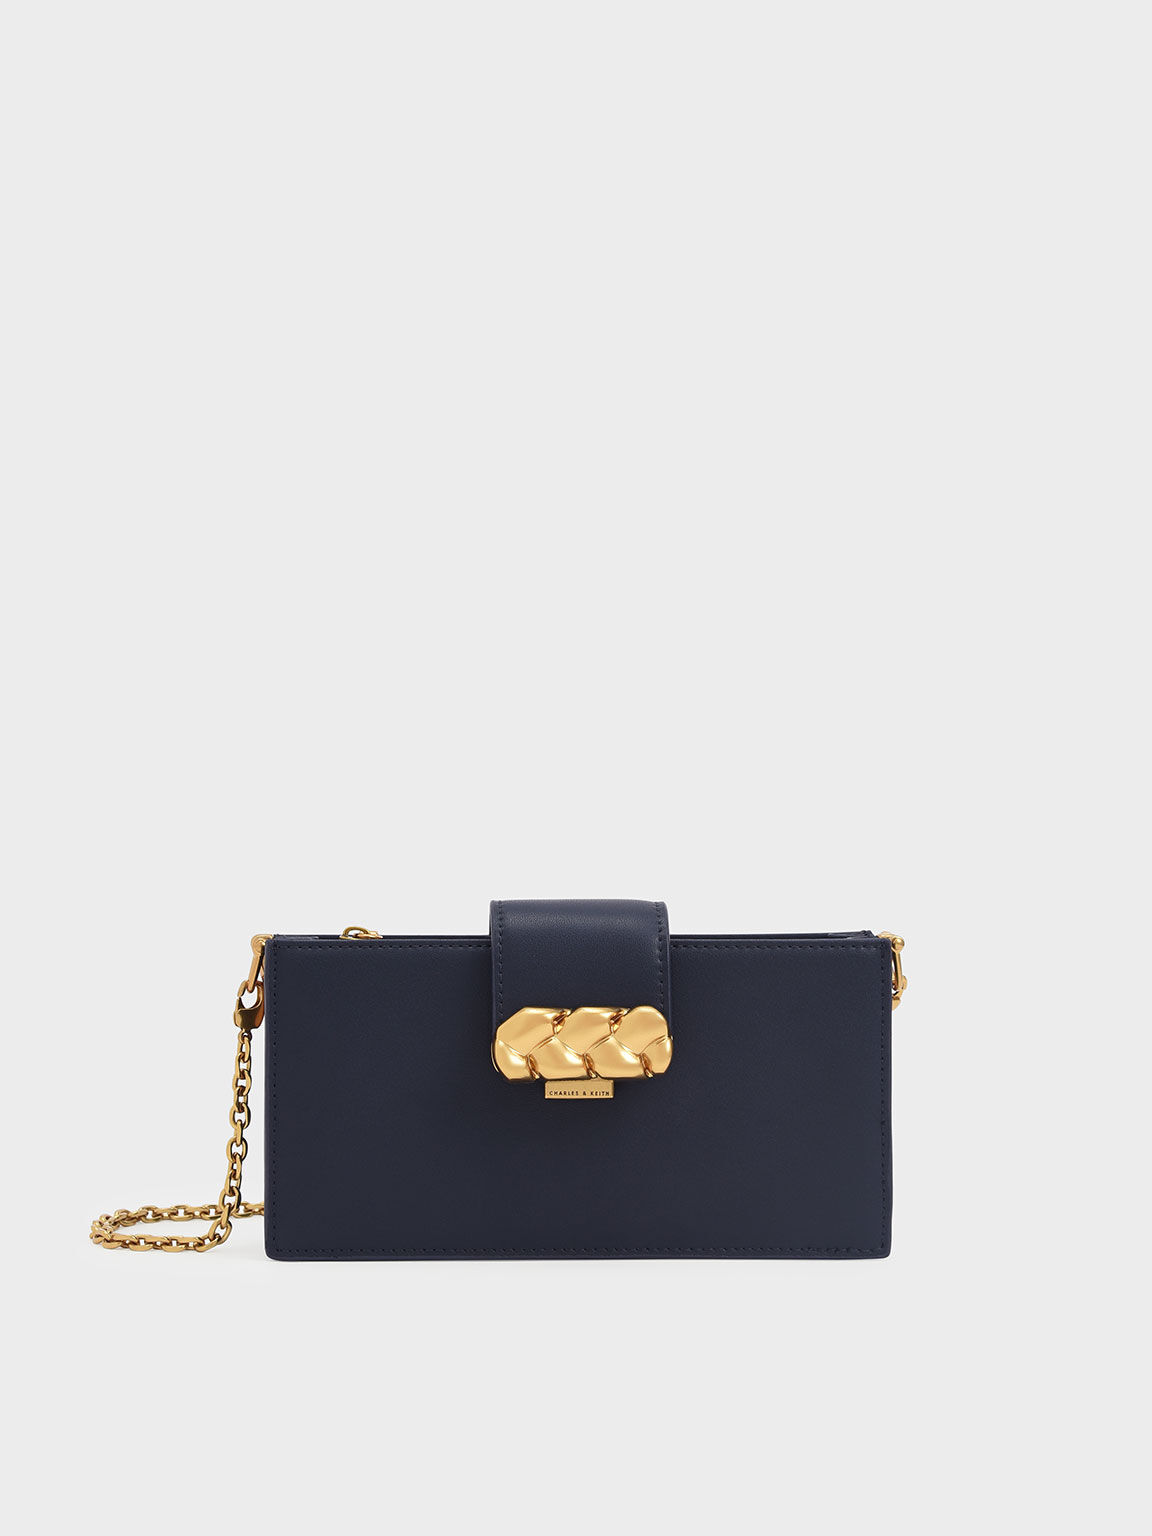 Abby Embellished Phone Pouch, Navy, hi-res